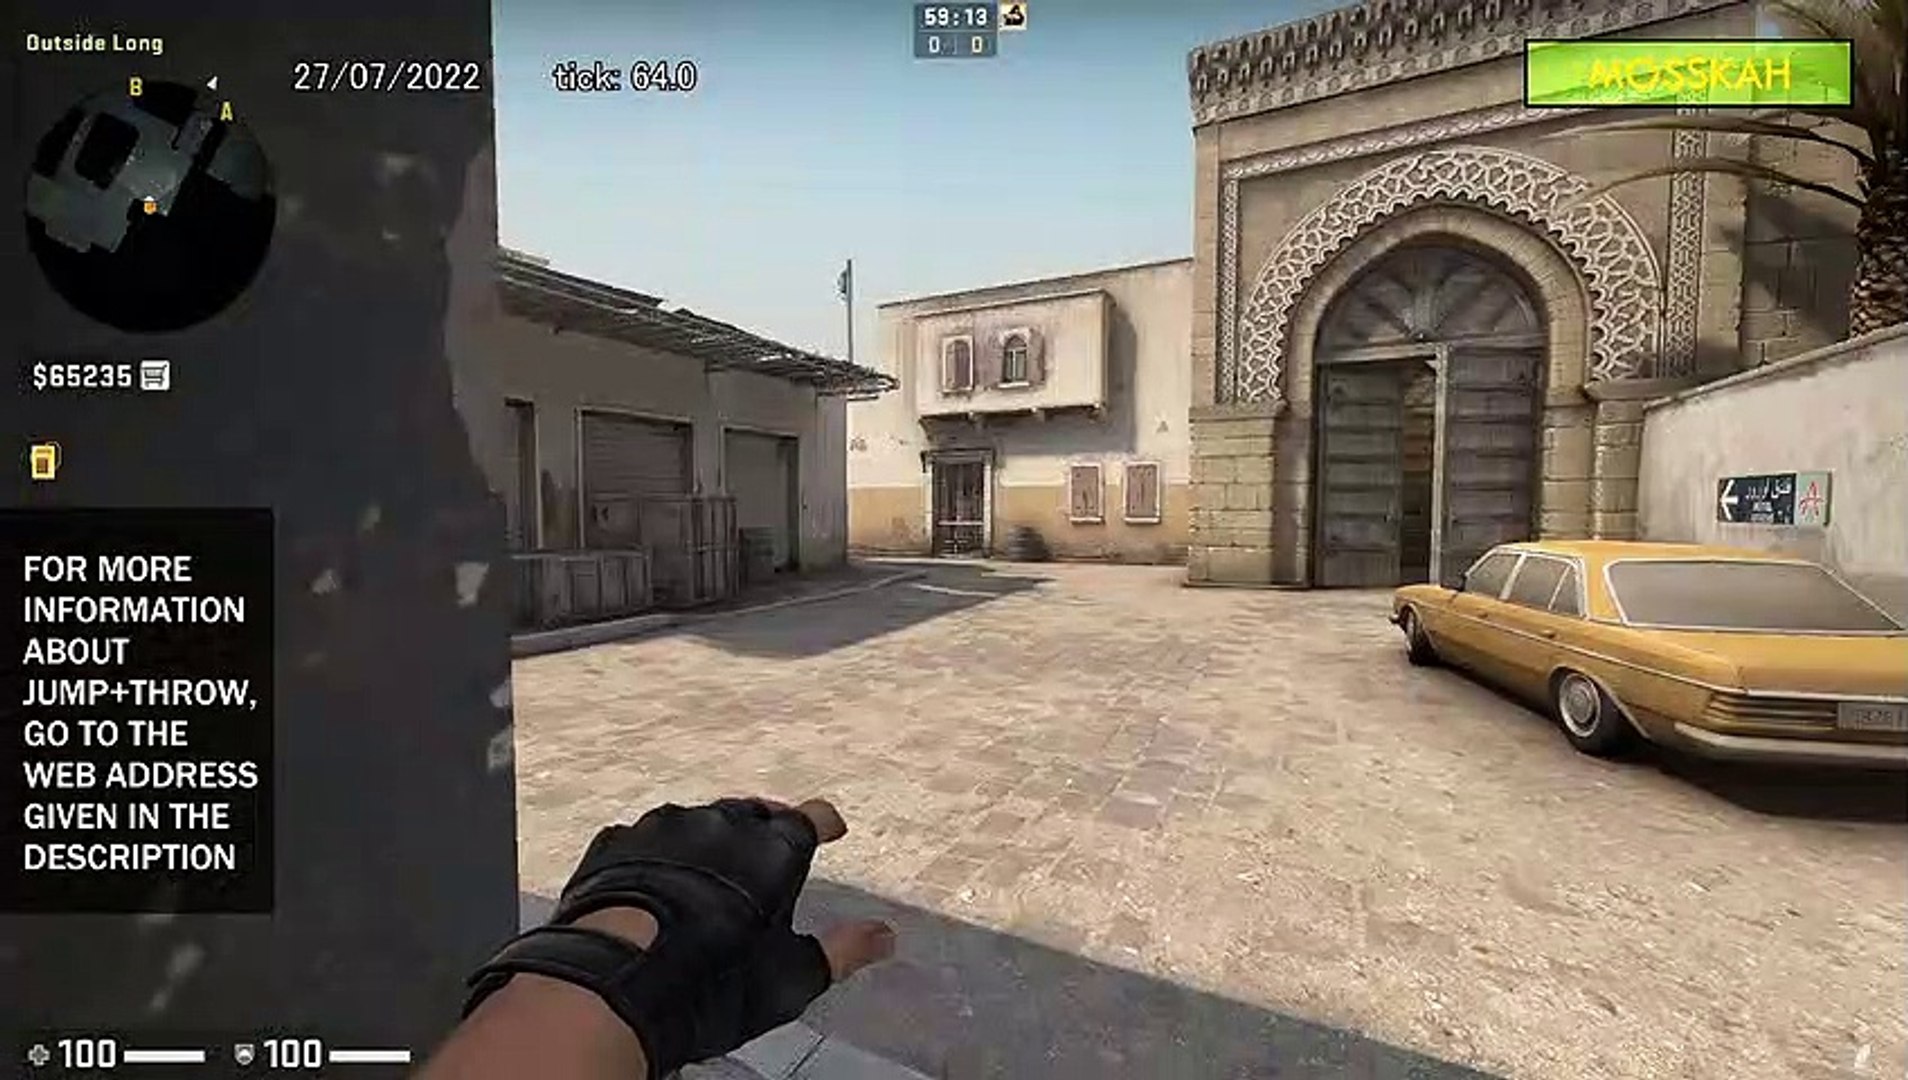 How to Smoke Catwalk on Dust 2, option 2 - CSGO - video Dailymotion